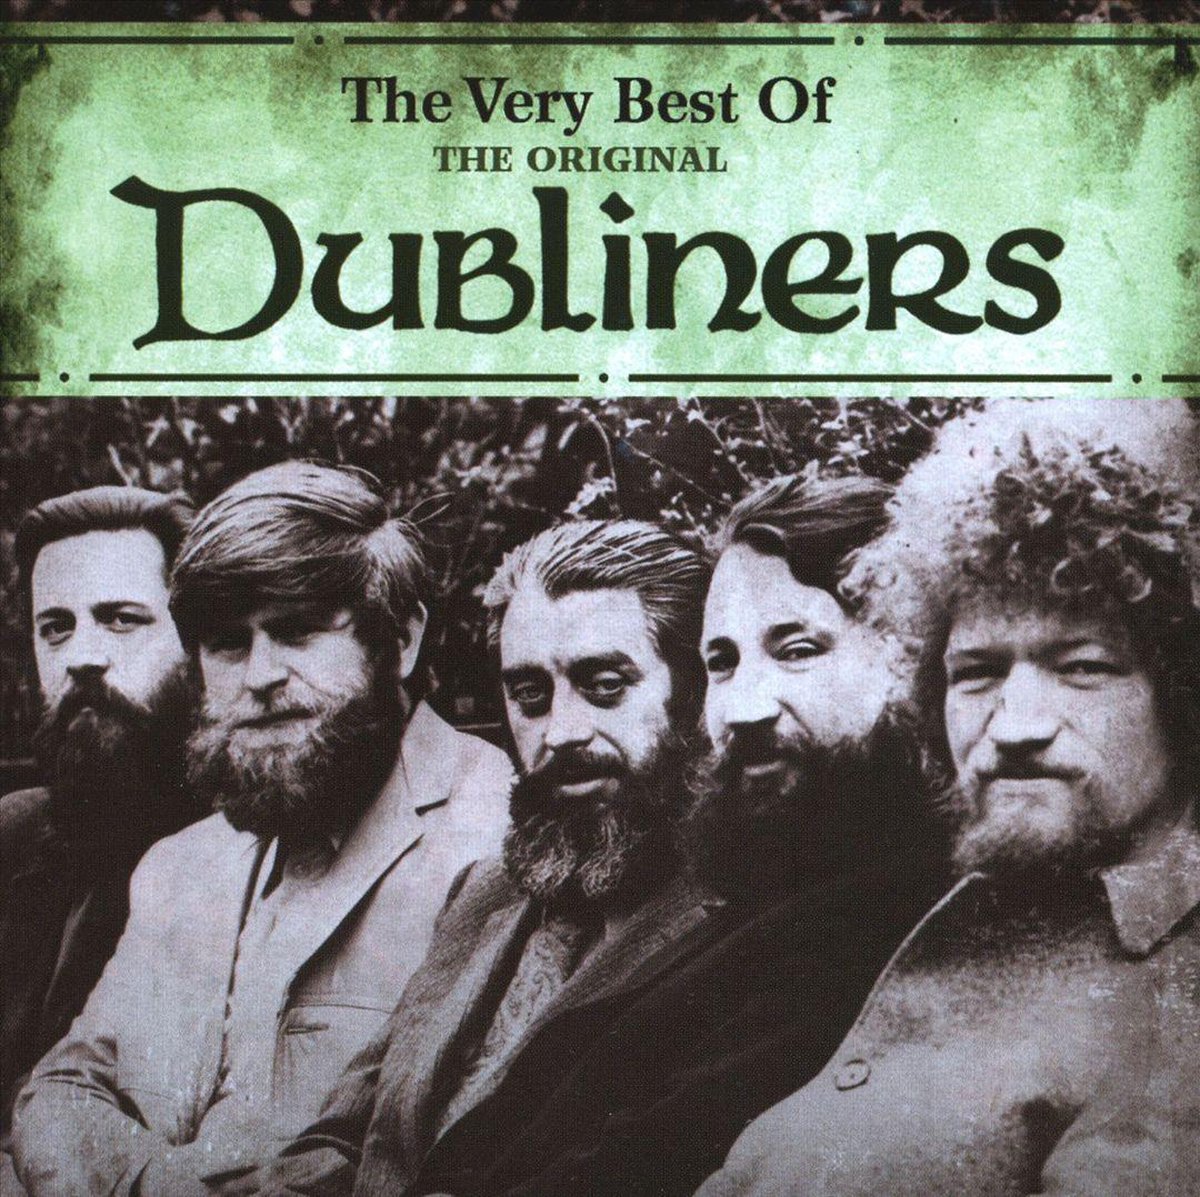 The Dubliners The Very Best Of, The Dubliners CD (album